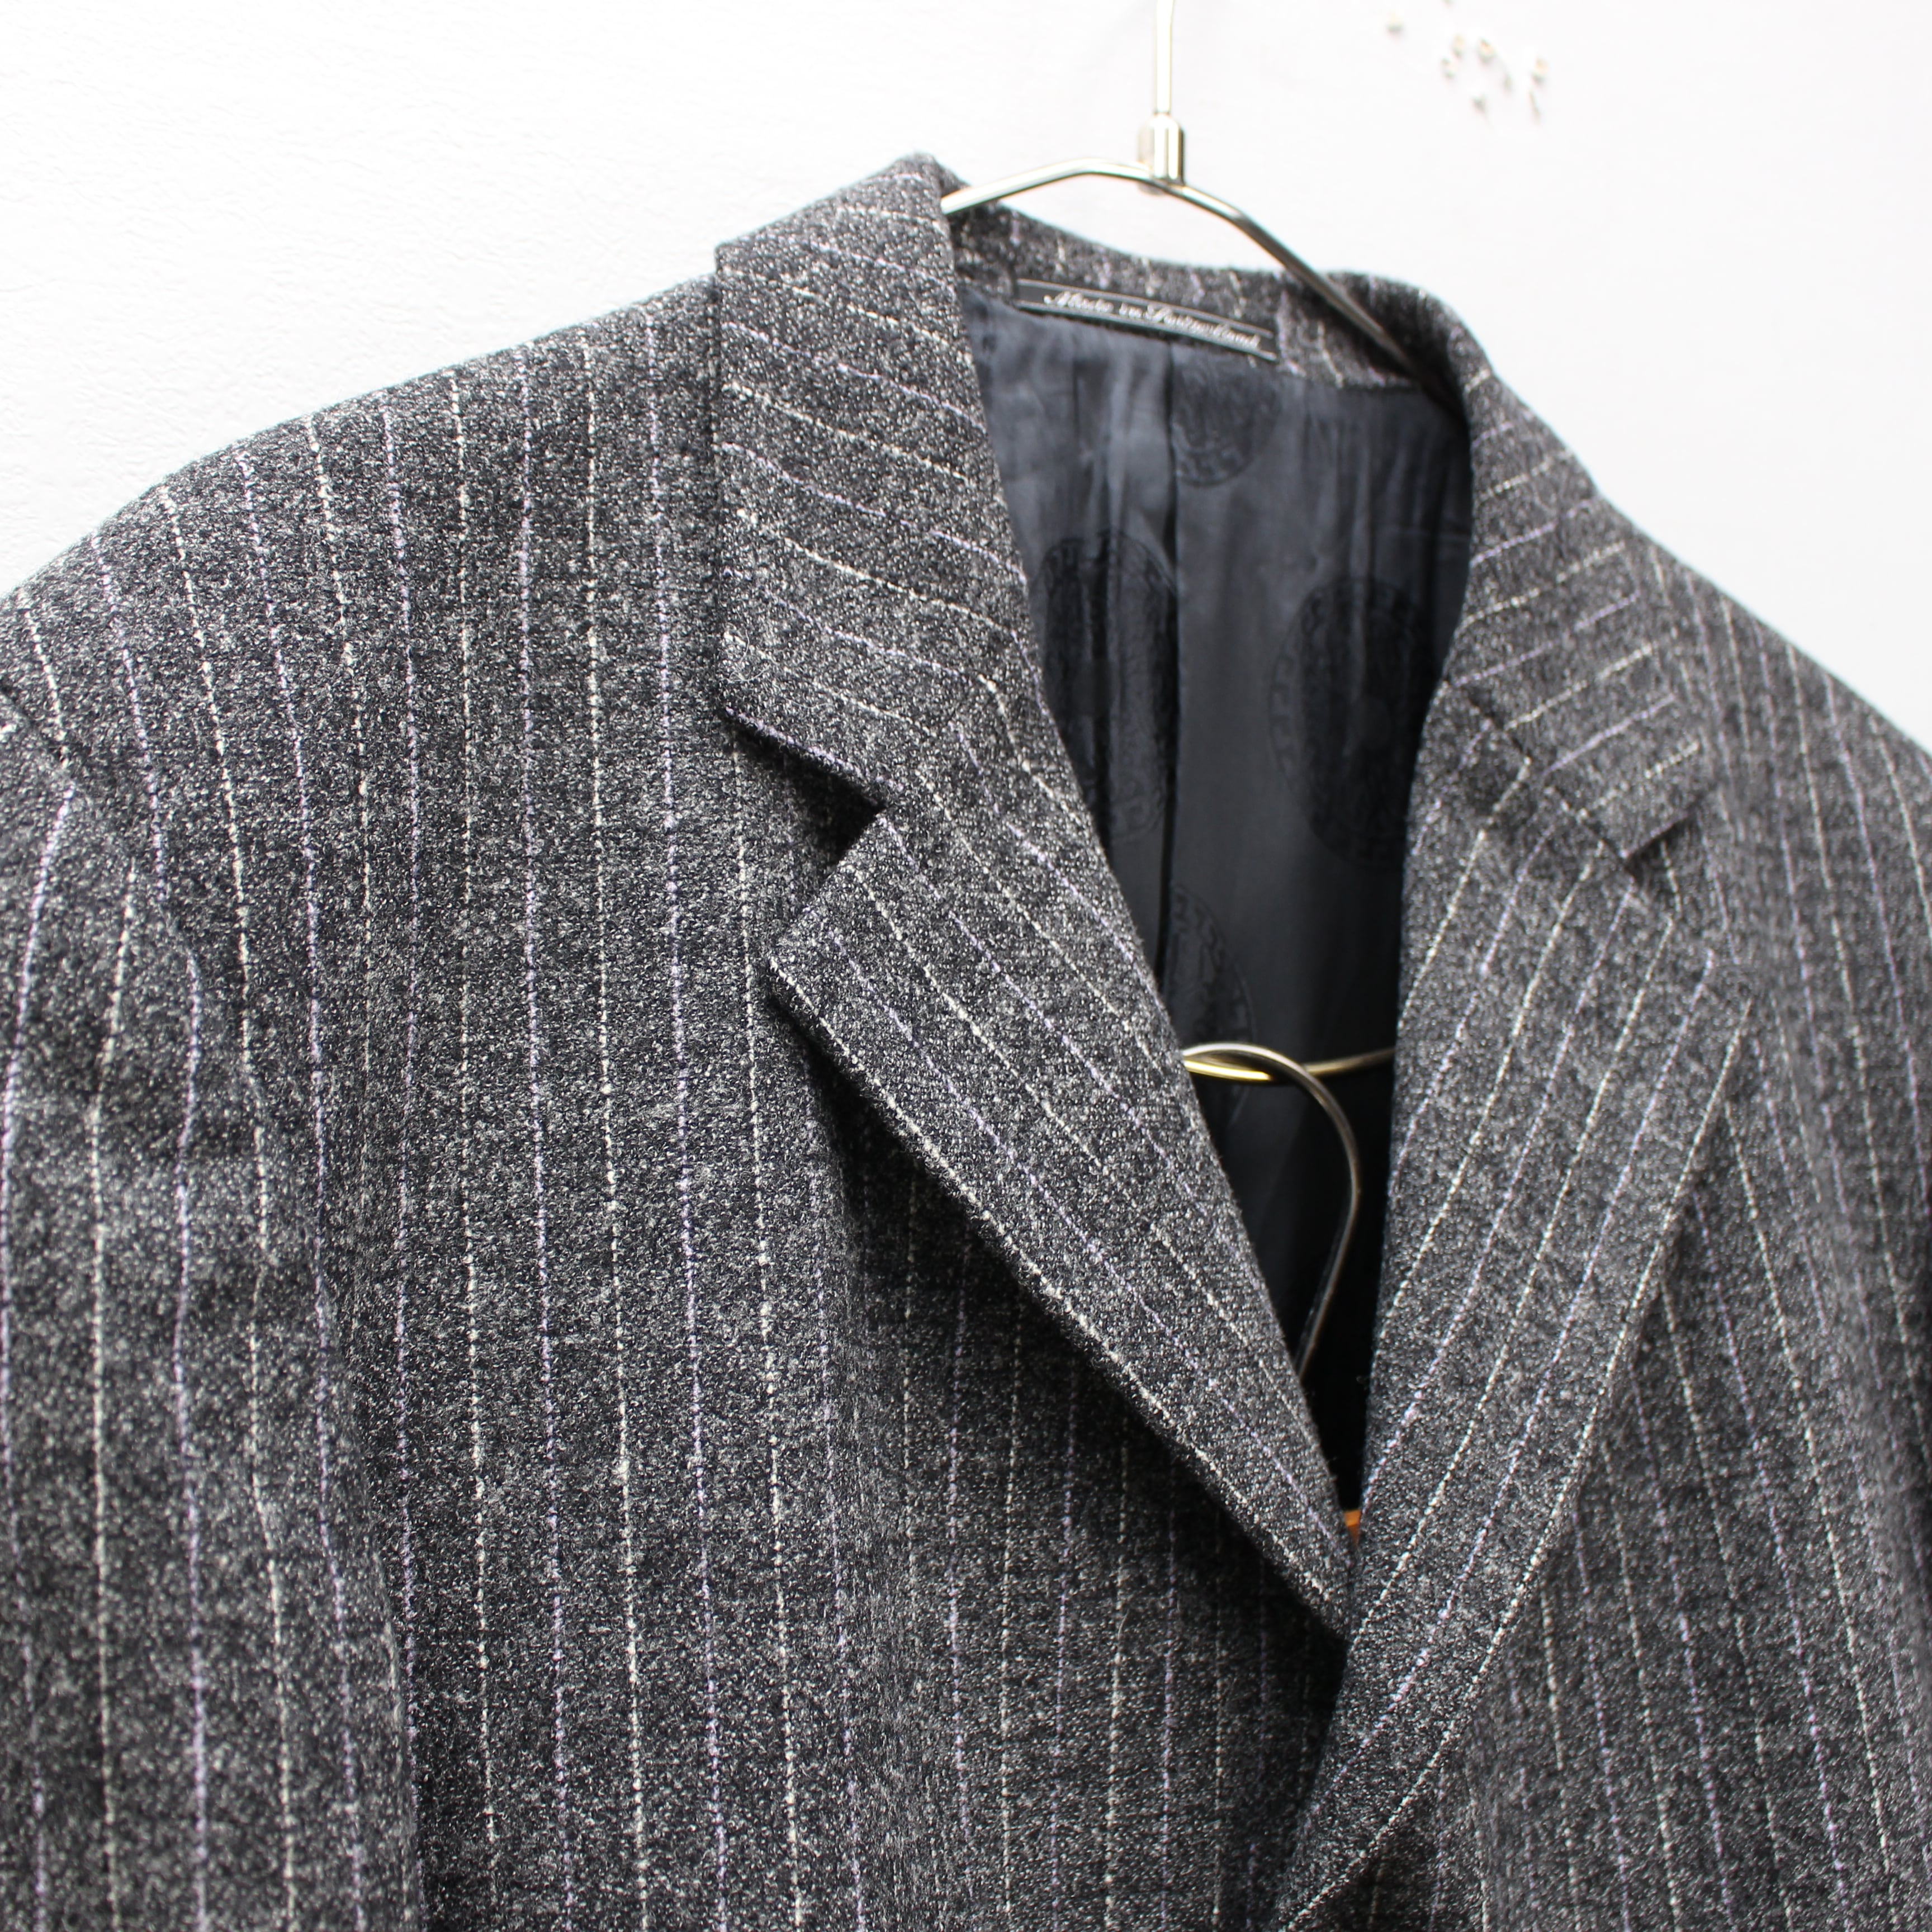 VERSACE CLASSIC WOOL STRIPE PATTERNED WOOL SET UP SUIT